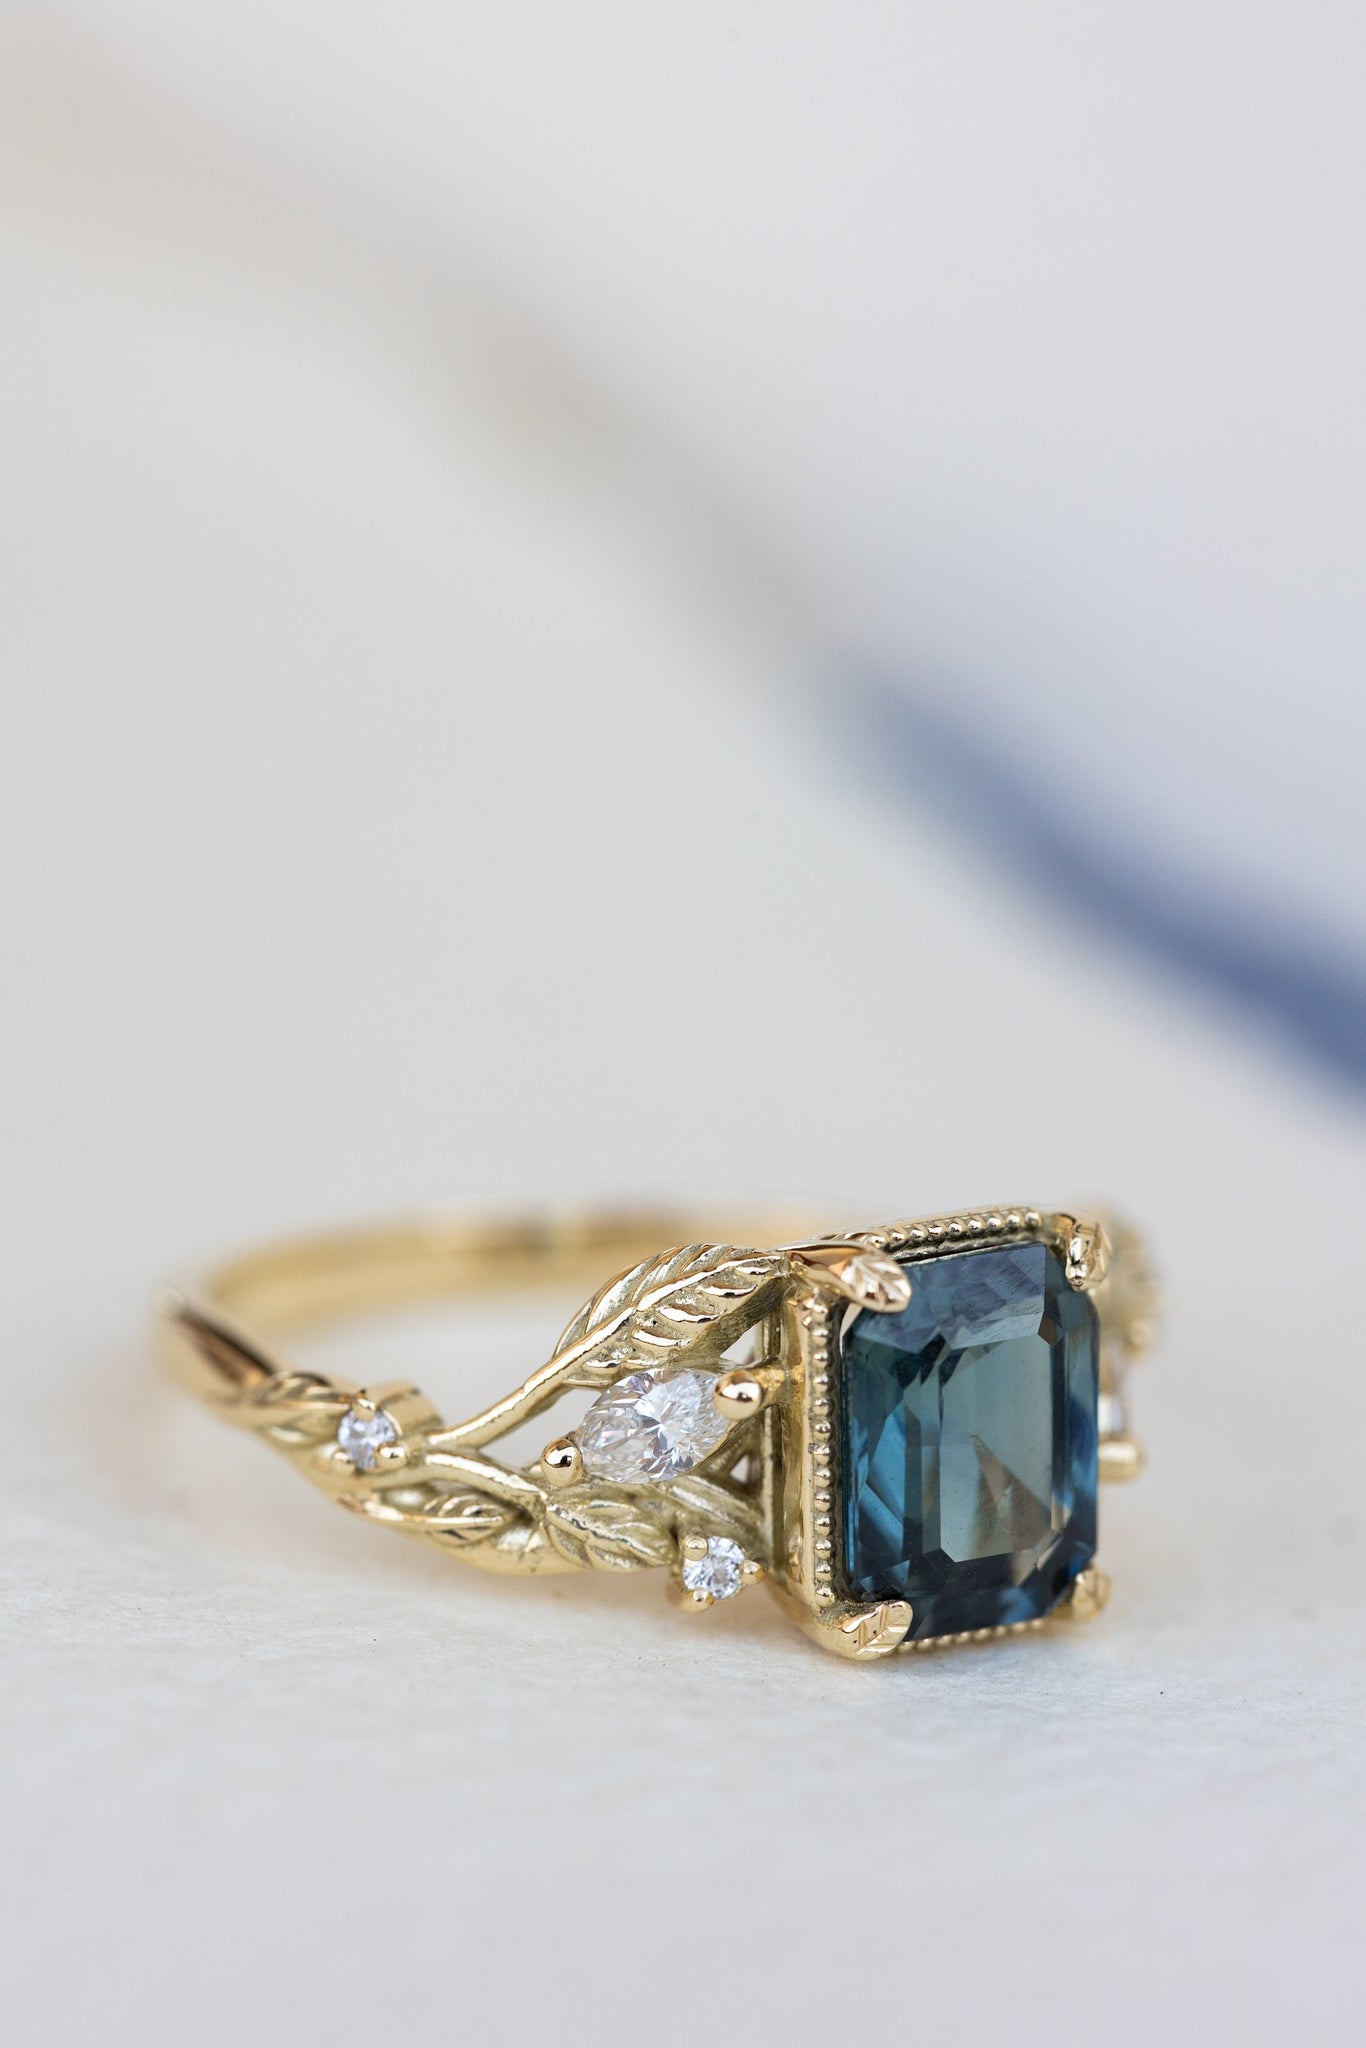 Emerald cut teal sapphire engagement ring, proposal ring with leaves and diamonds / Patricia - Eden Garden Jewelry™